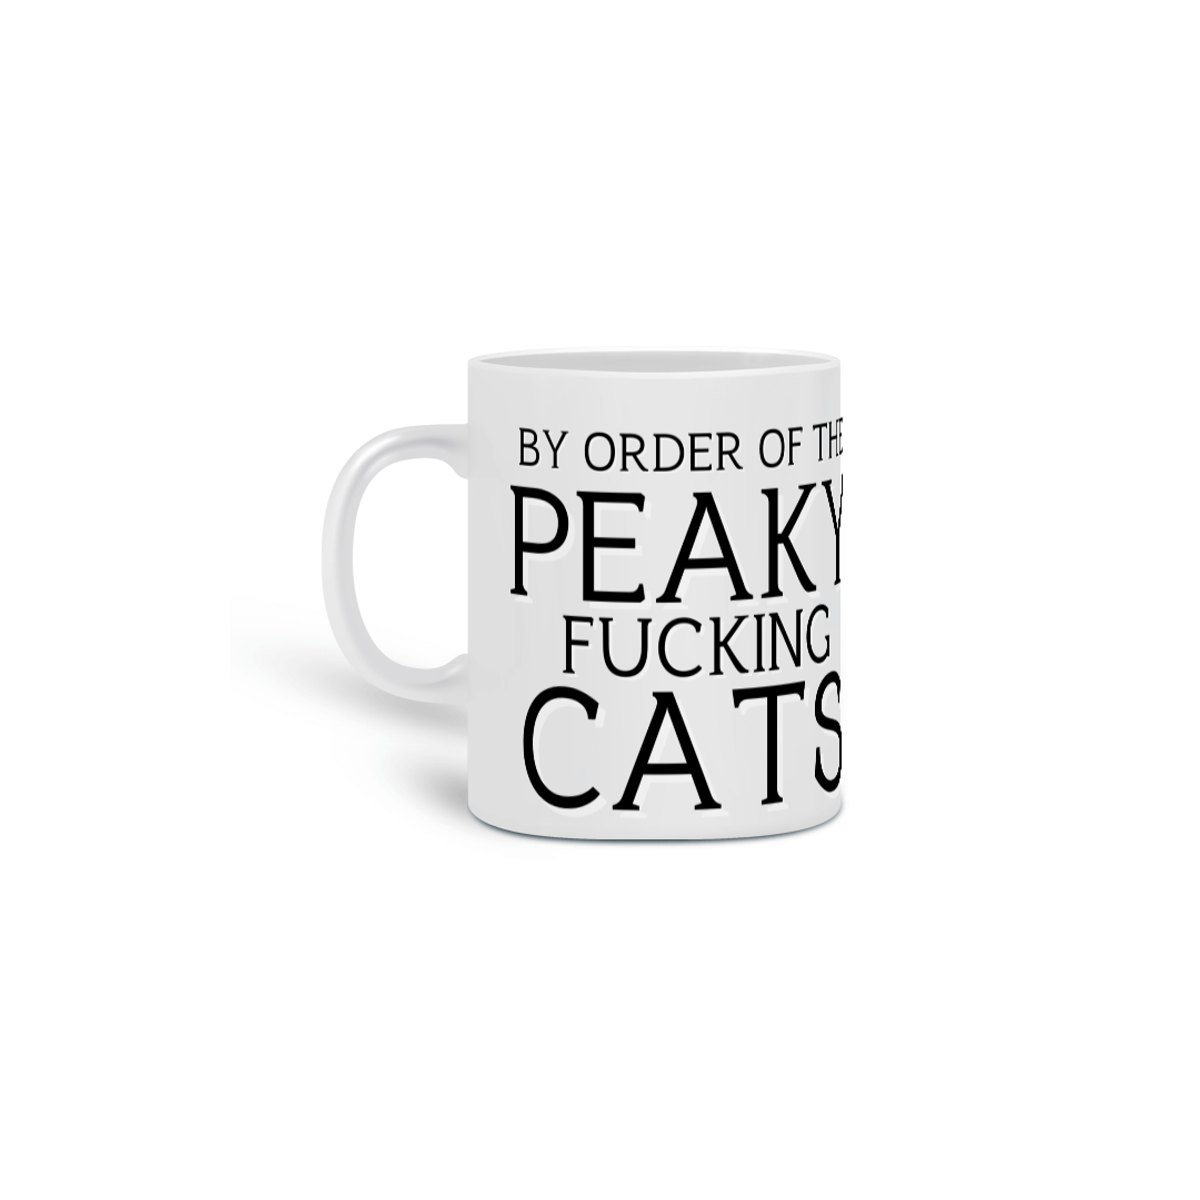 Nome do produto: Caneca - For the Order of Peaky F***ing Cats